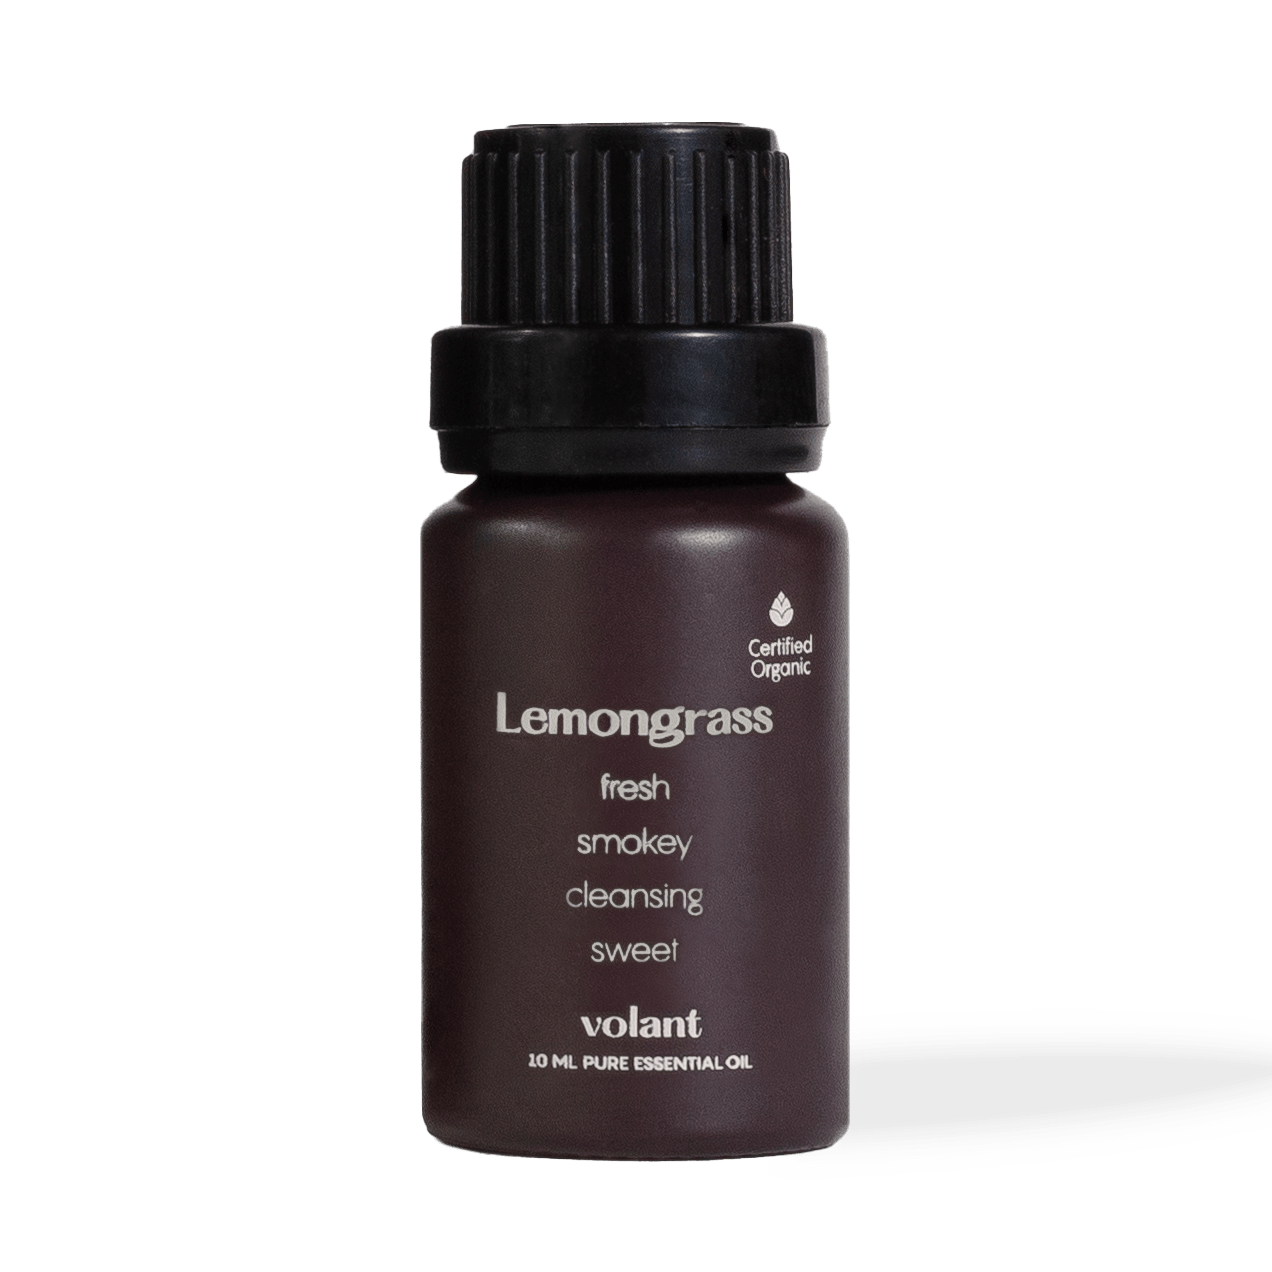 volant organic lemongrass essential oil to repel insects